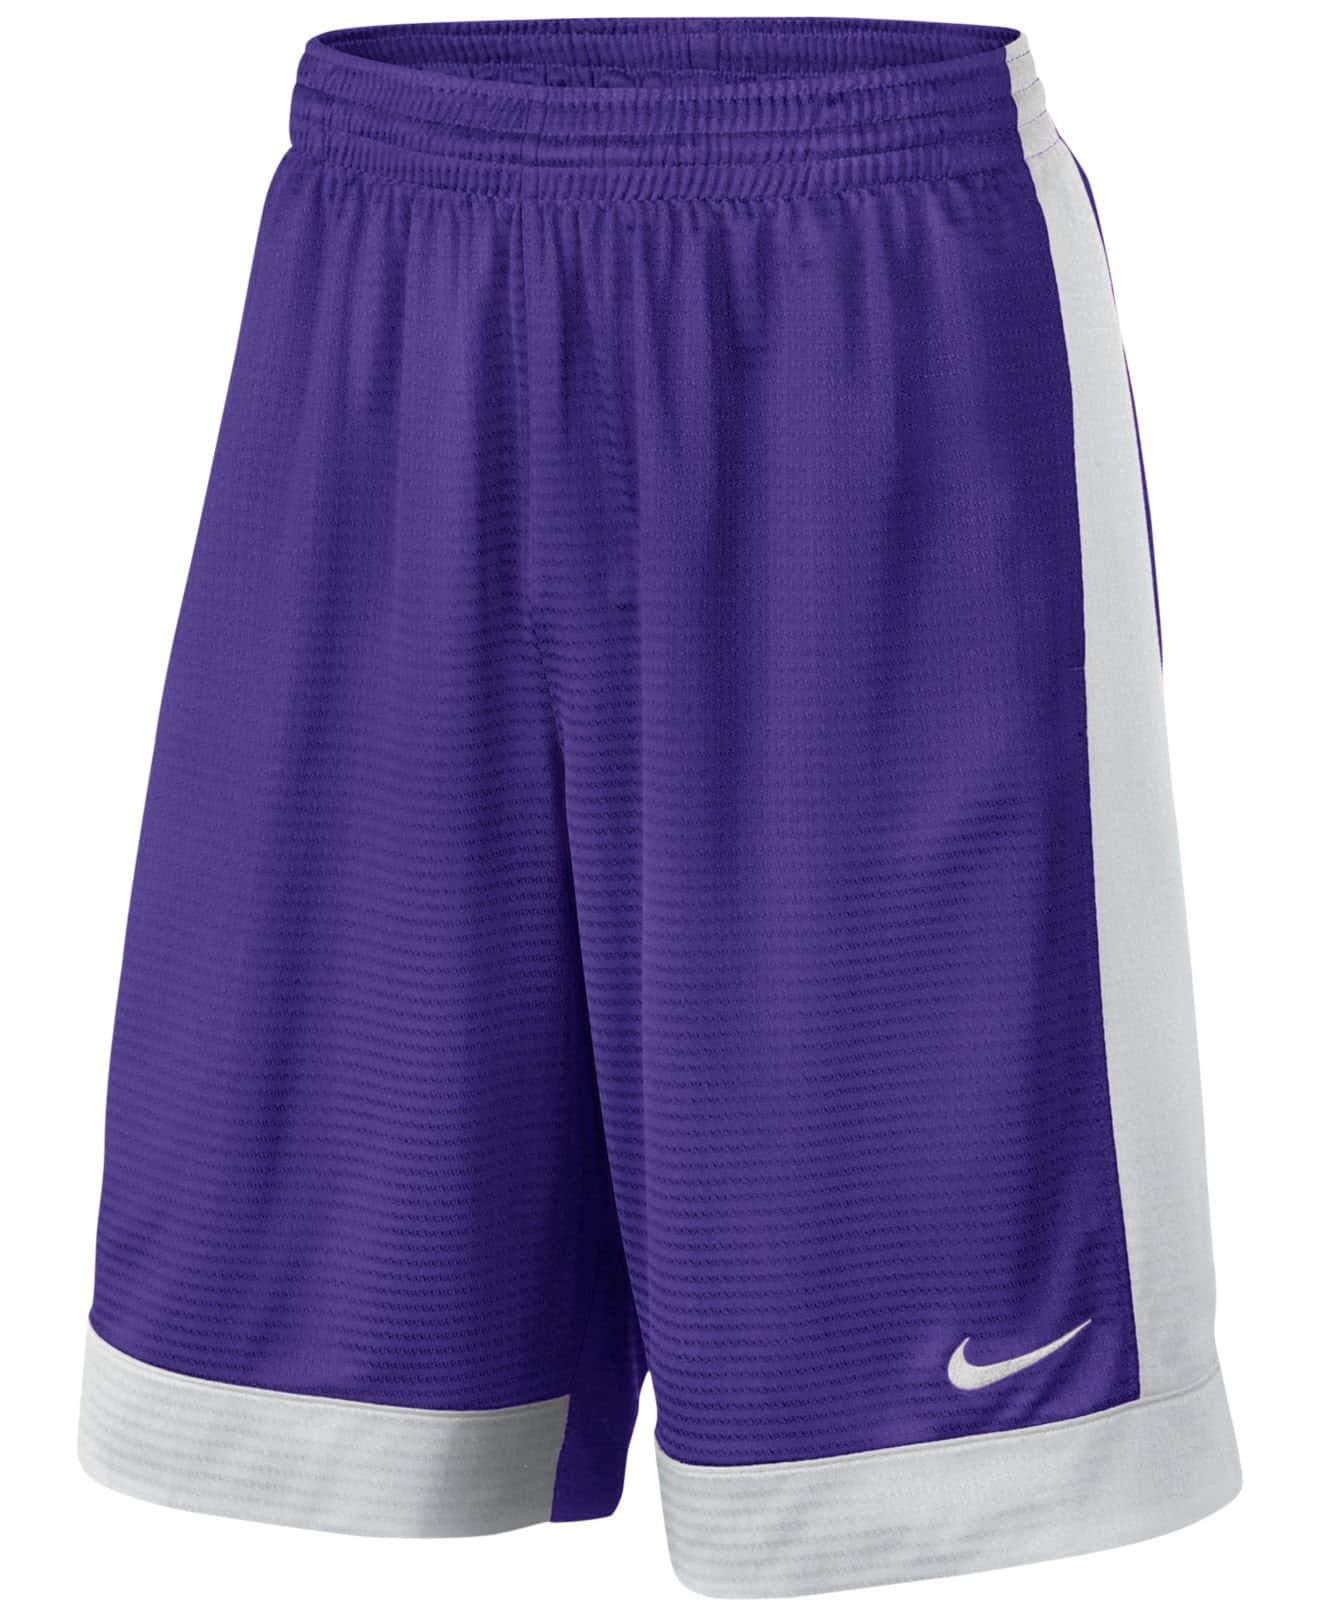 Stay cool and stylish with these vibrant purple shorts Wallpaper